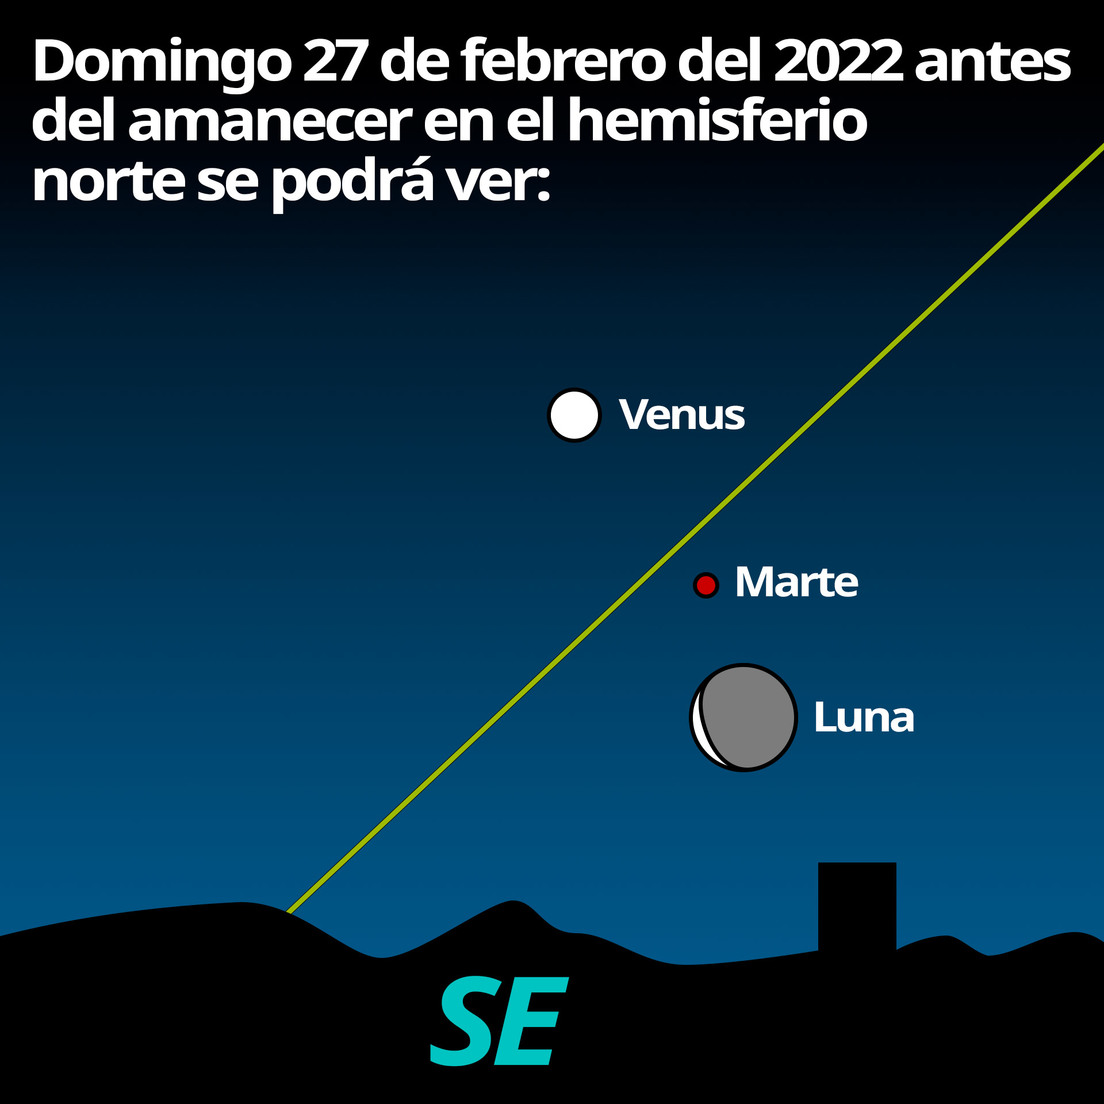 Representation of the planetary and lunar alignment of February 27, 2022